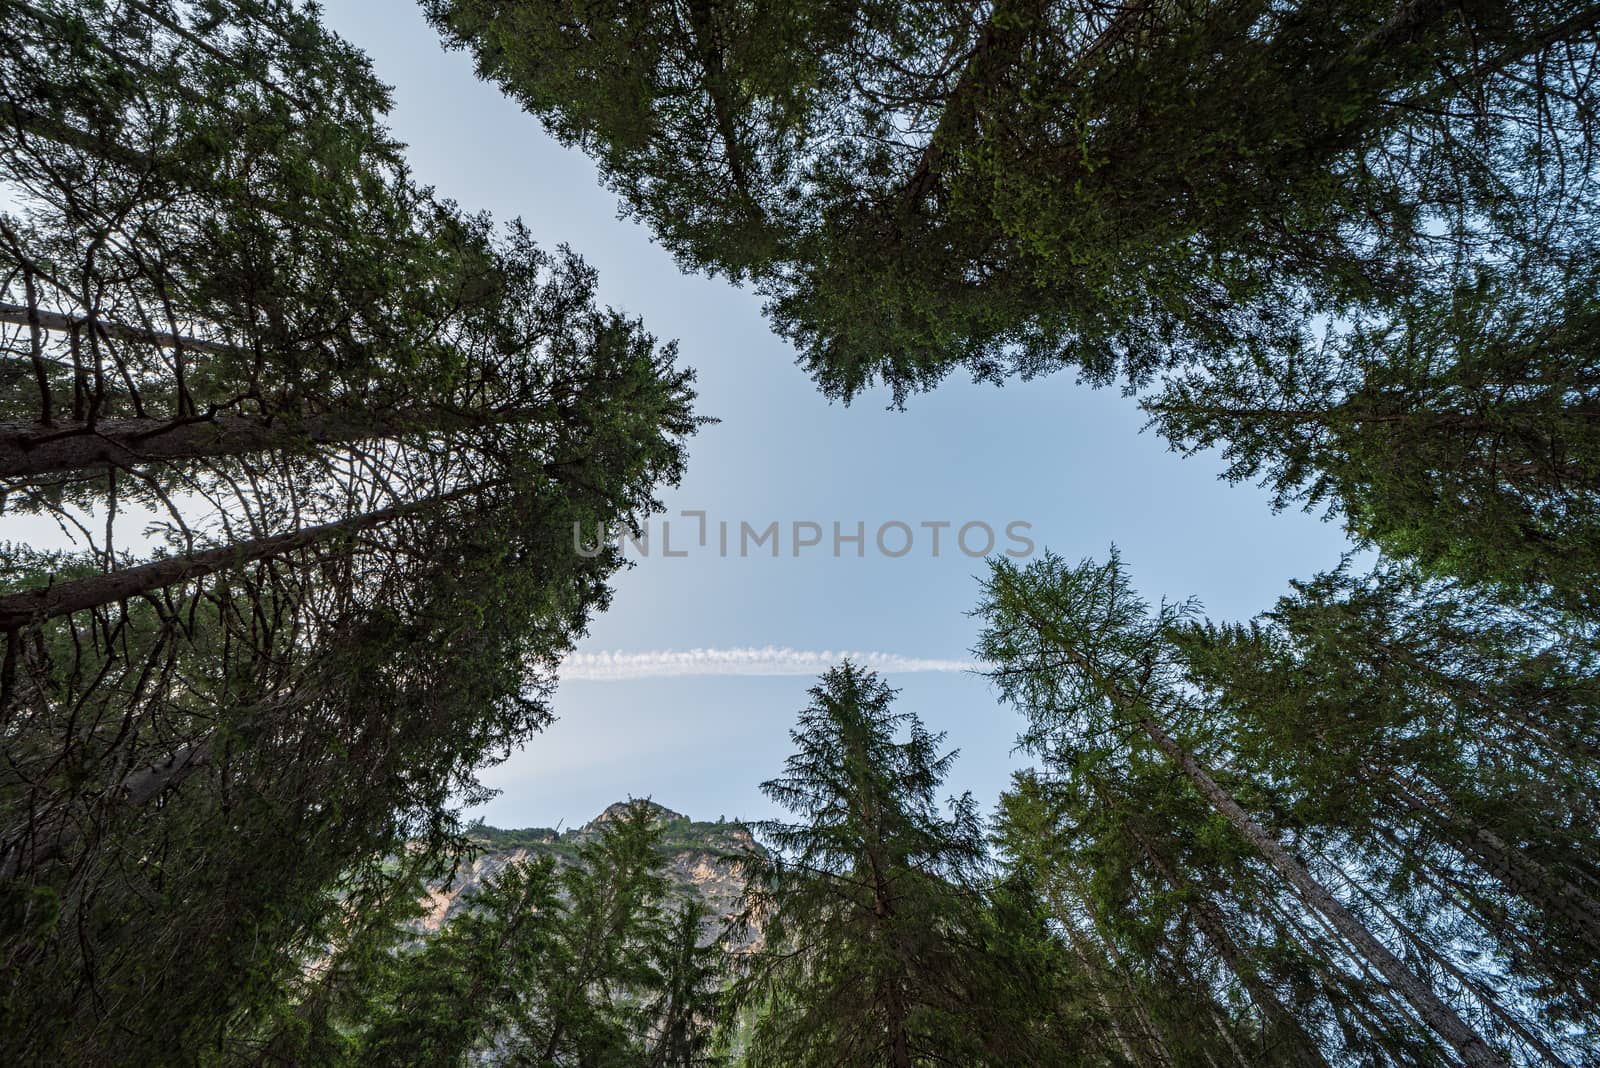 Looking upwards you can see a blue sky among the tall trees by brambillasimone